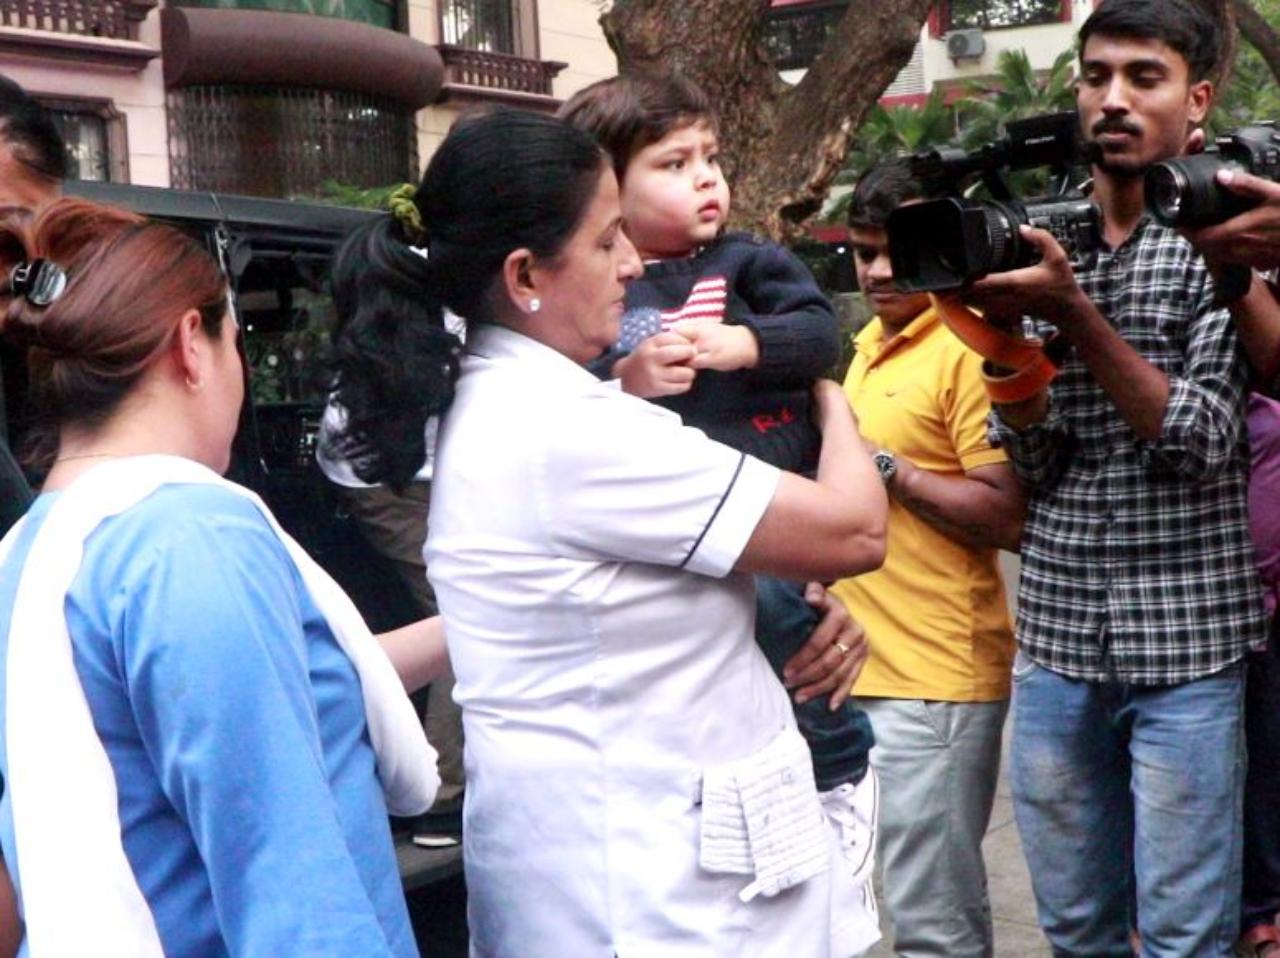 And, along with Taimur came baby Jeh. Doesn't he look super cute?